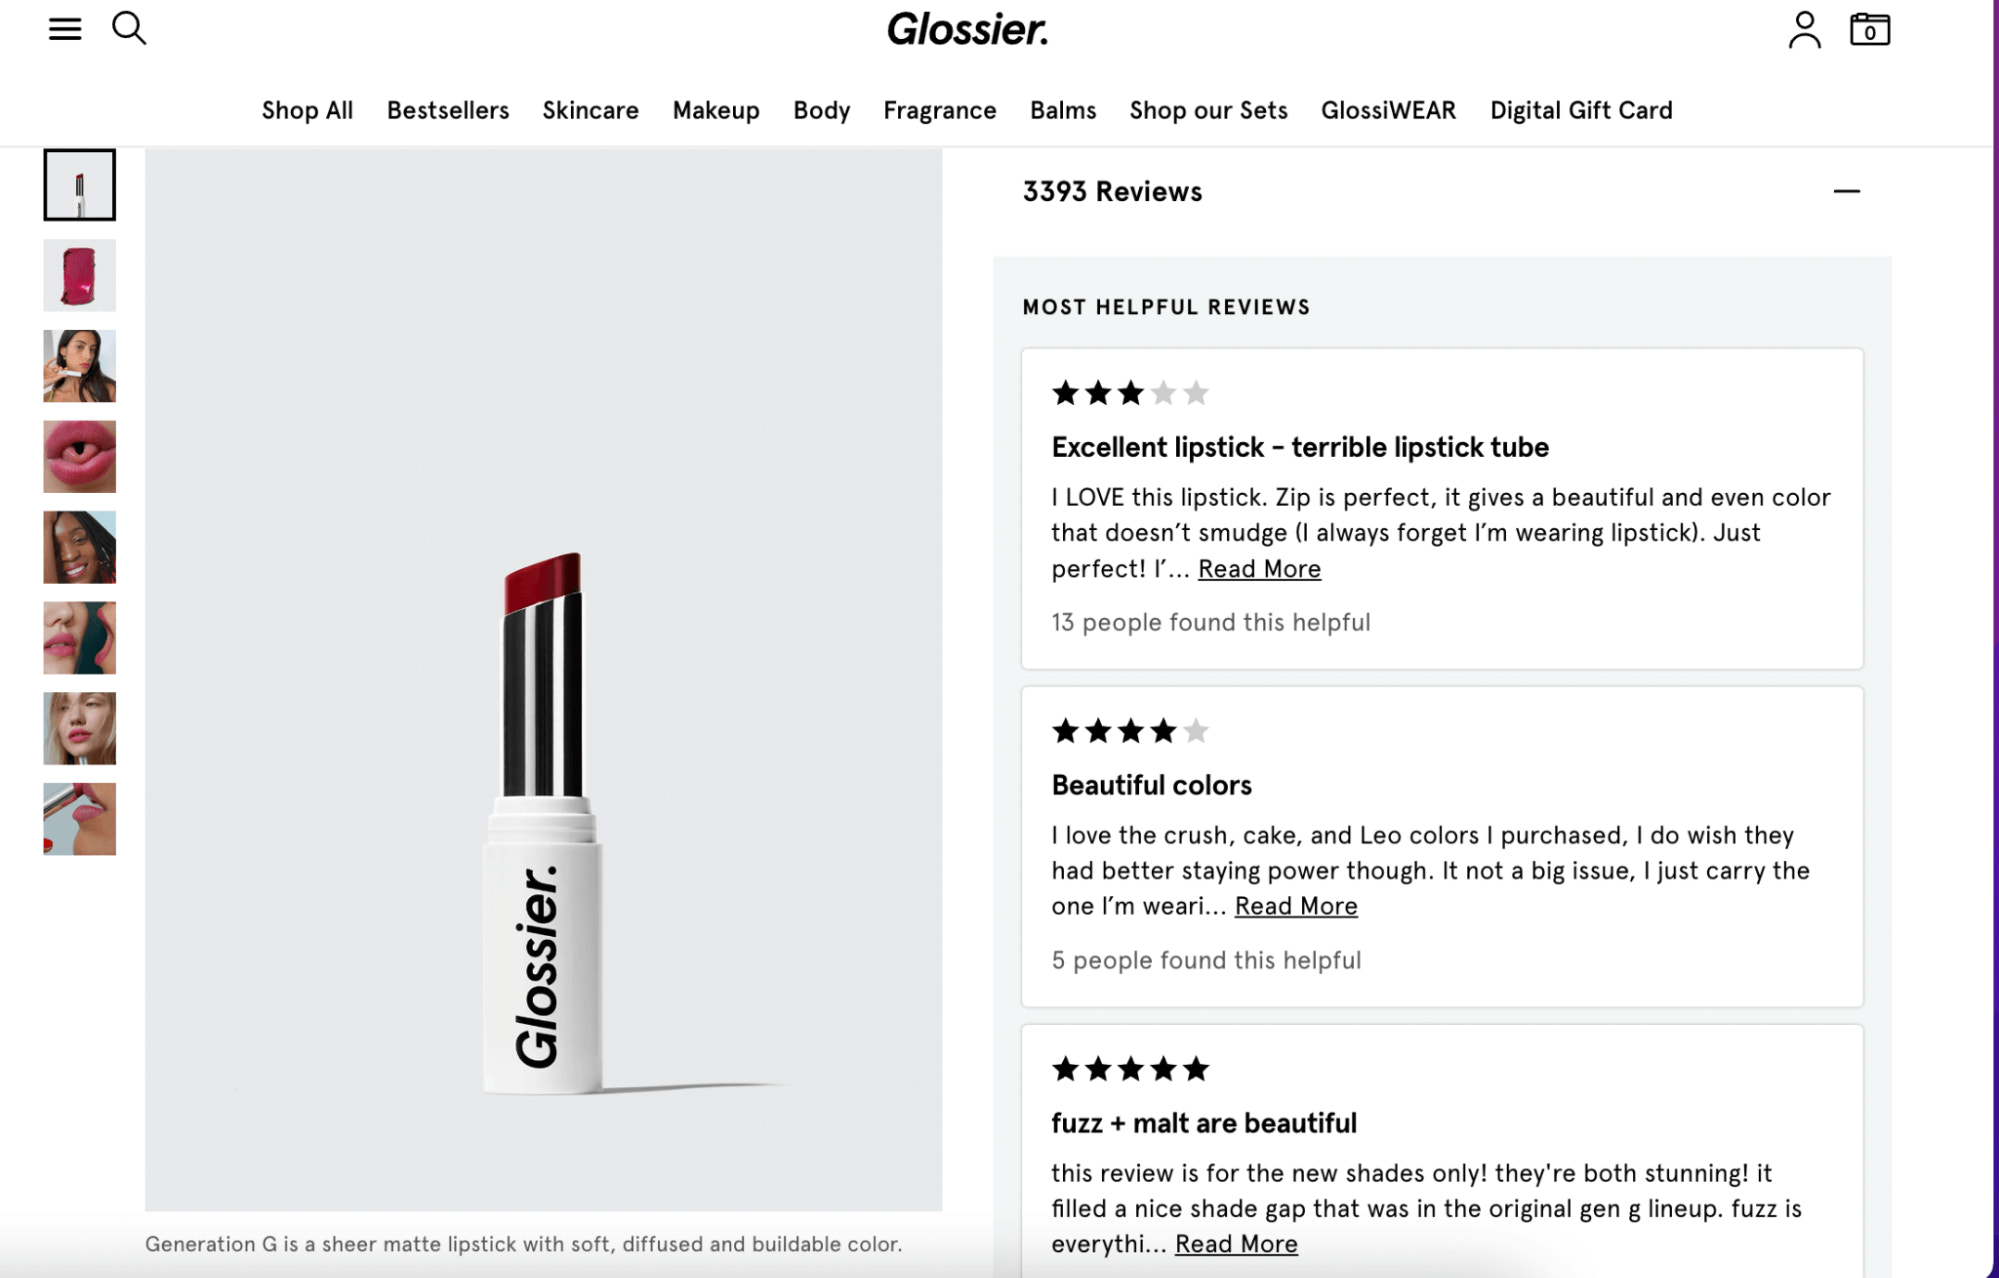 Product page for Glossier’s lipstick showcasing 3,393 customer reviews.